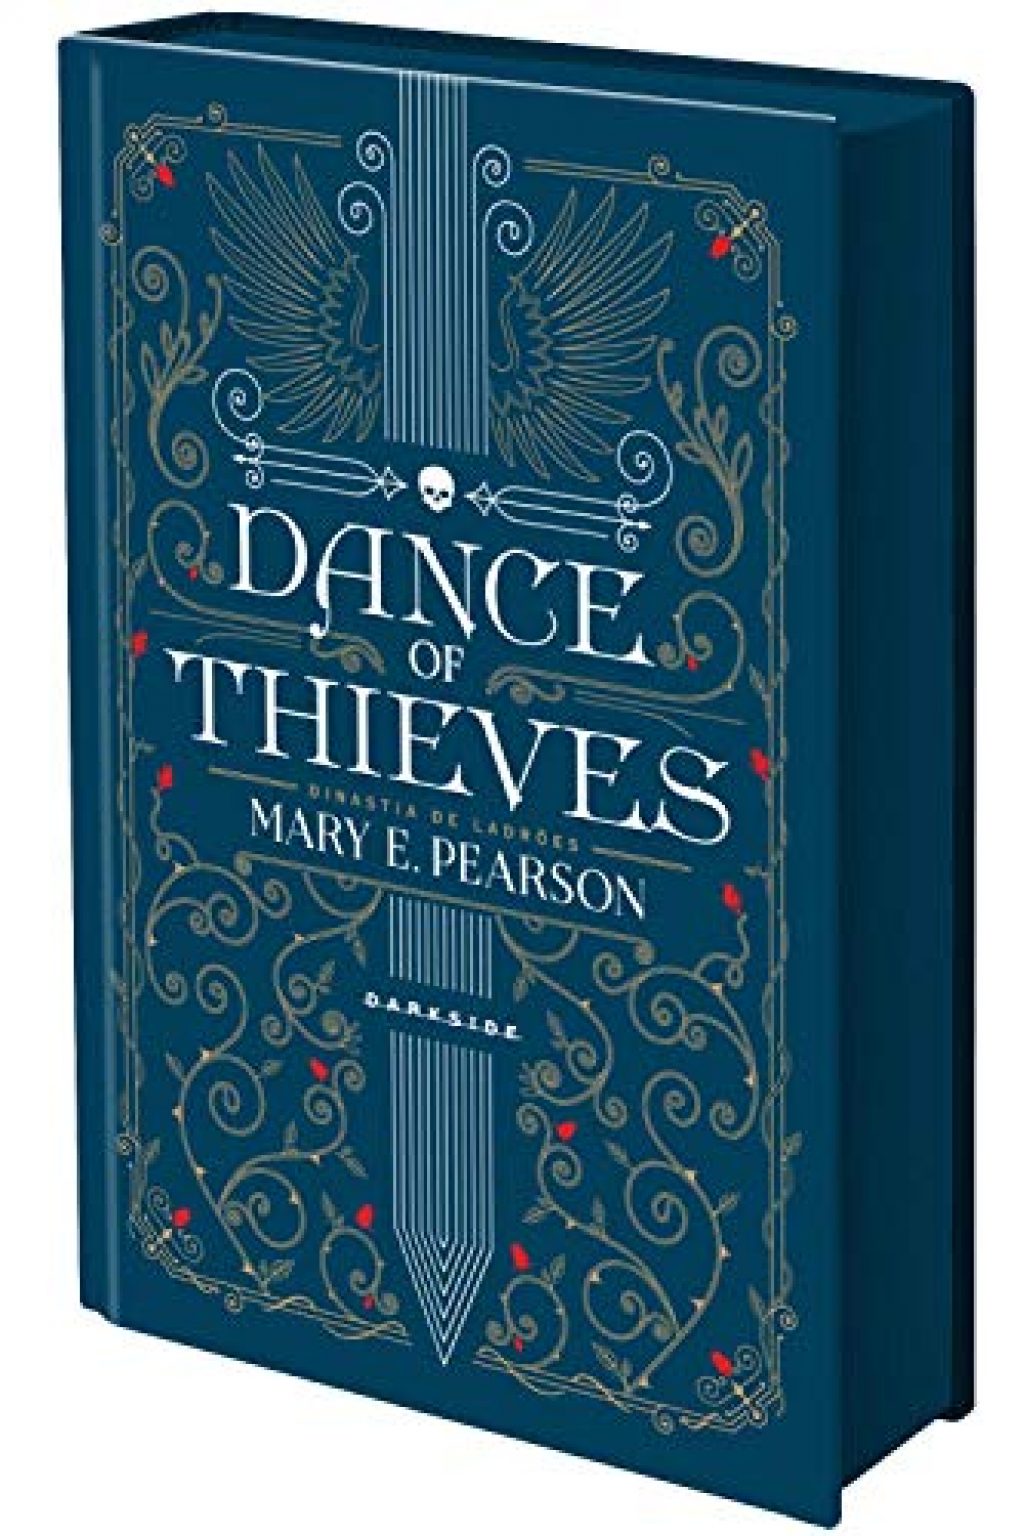 the dance of thieves